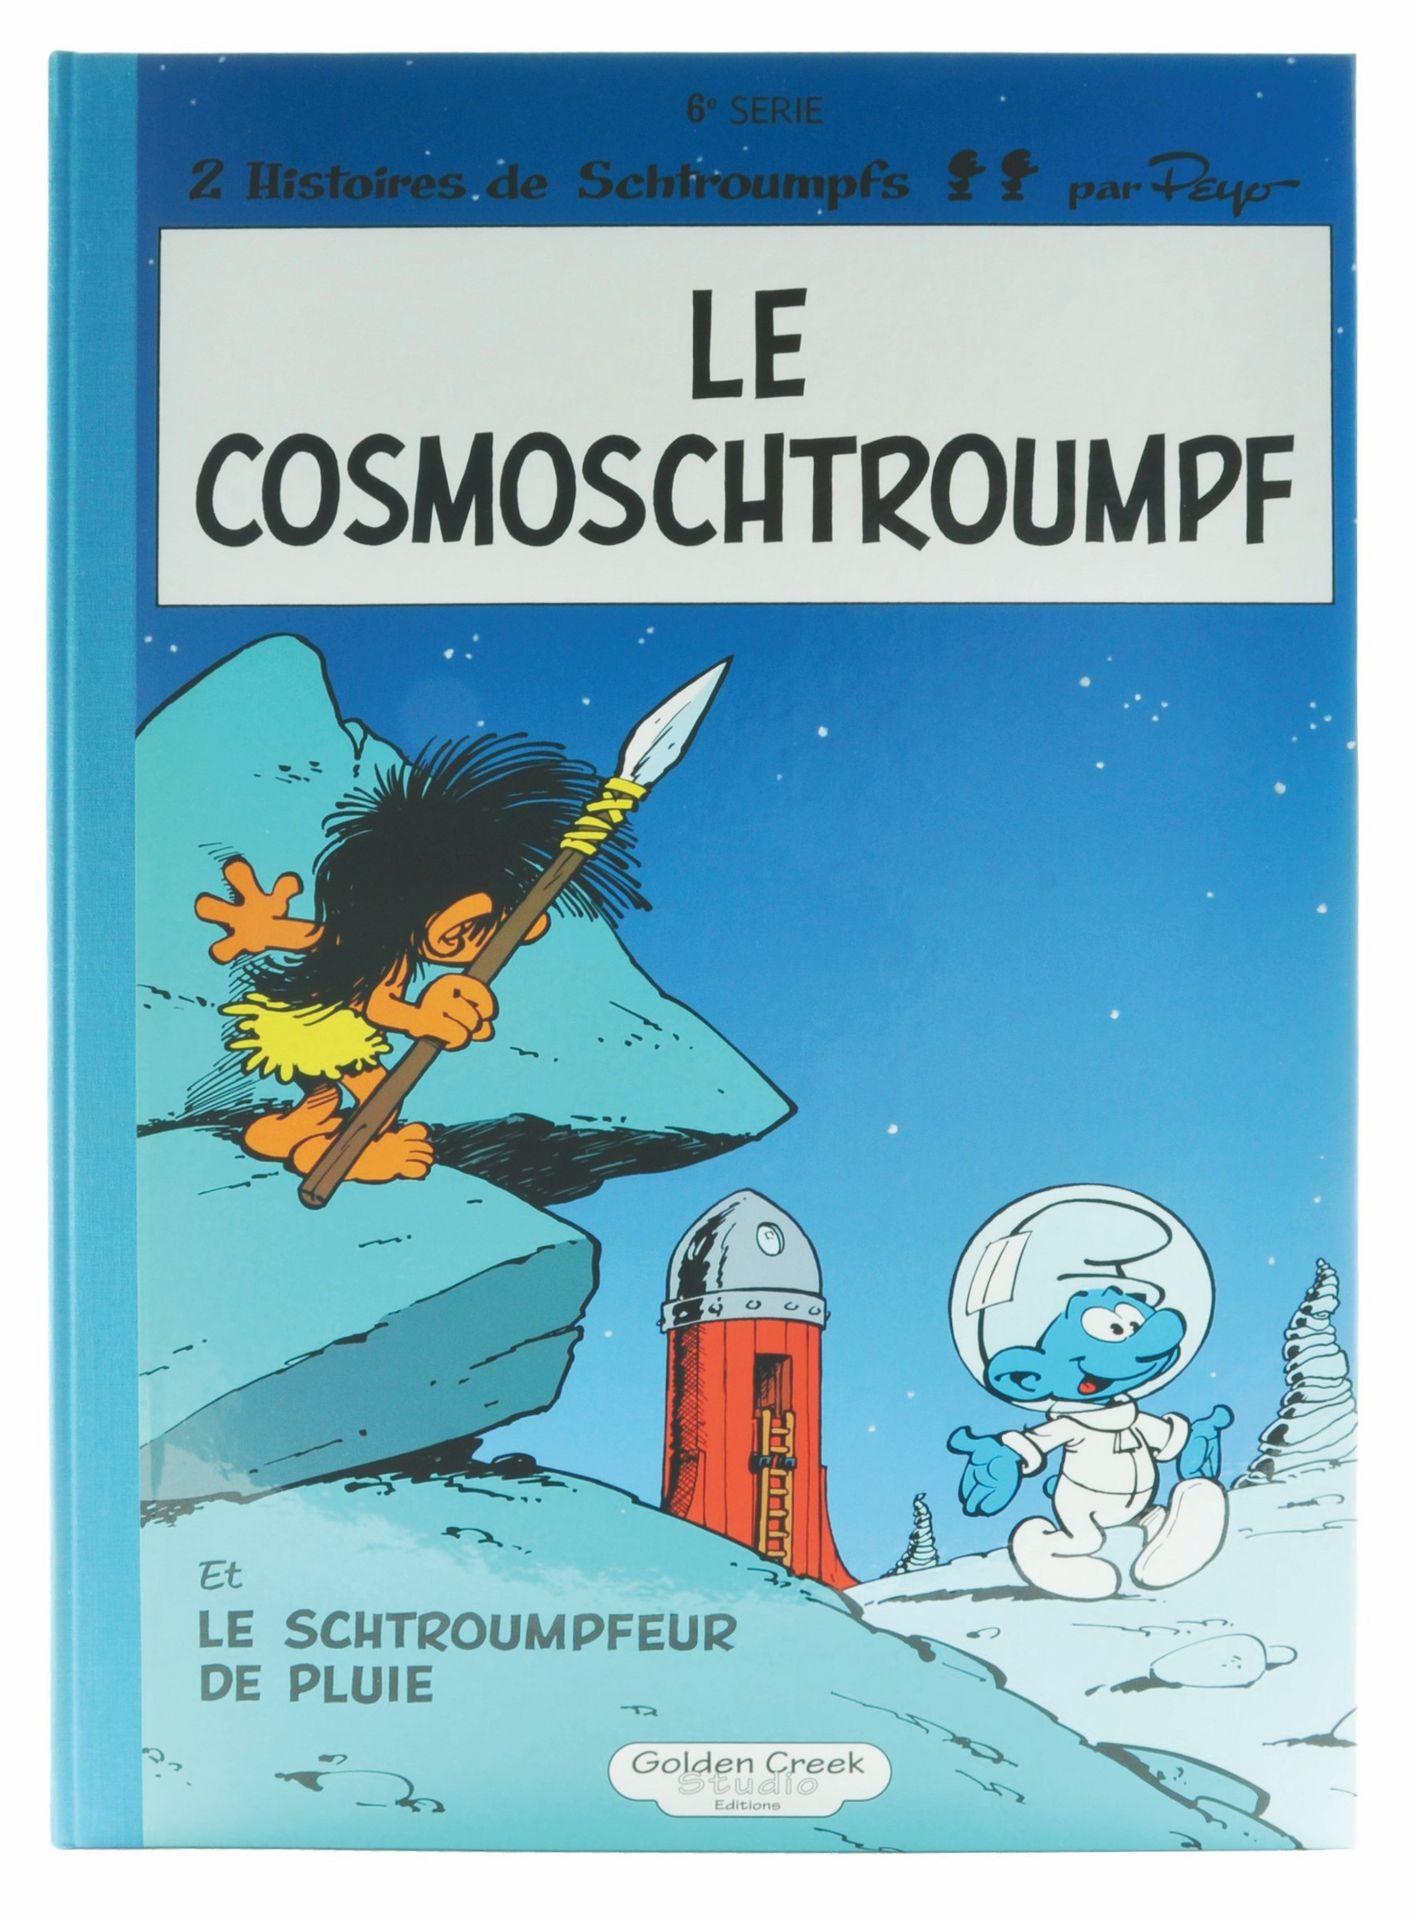 PEYO The Smurfs. Vol 6: Le cosmoschtroumpf. Deluxe edition 495 numbered copies. &hellip;